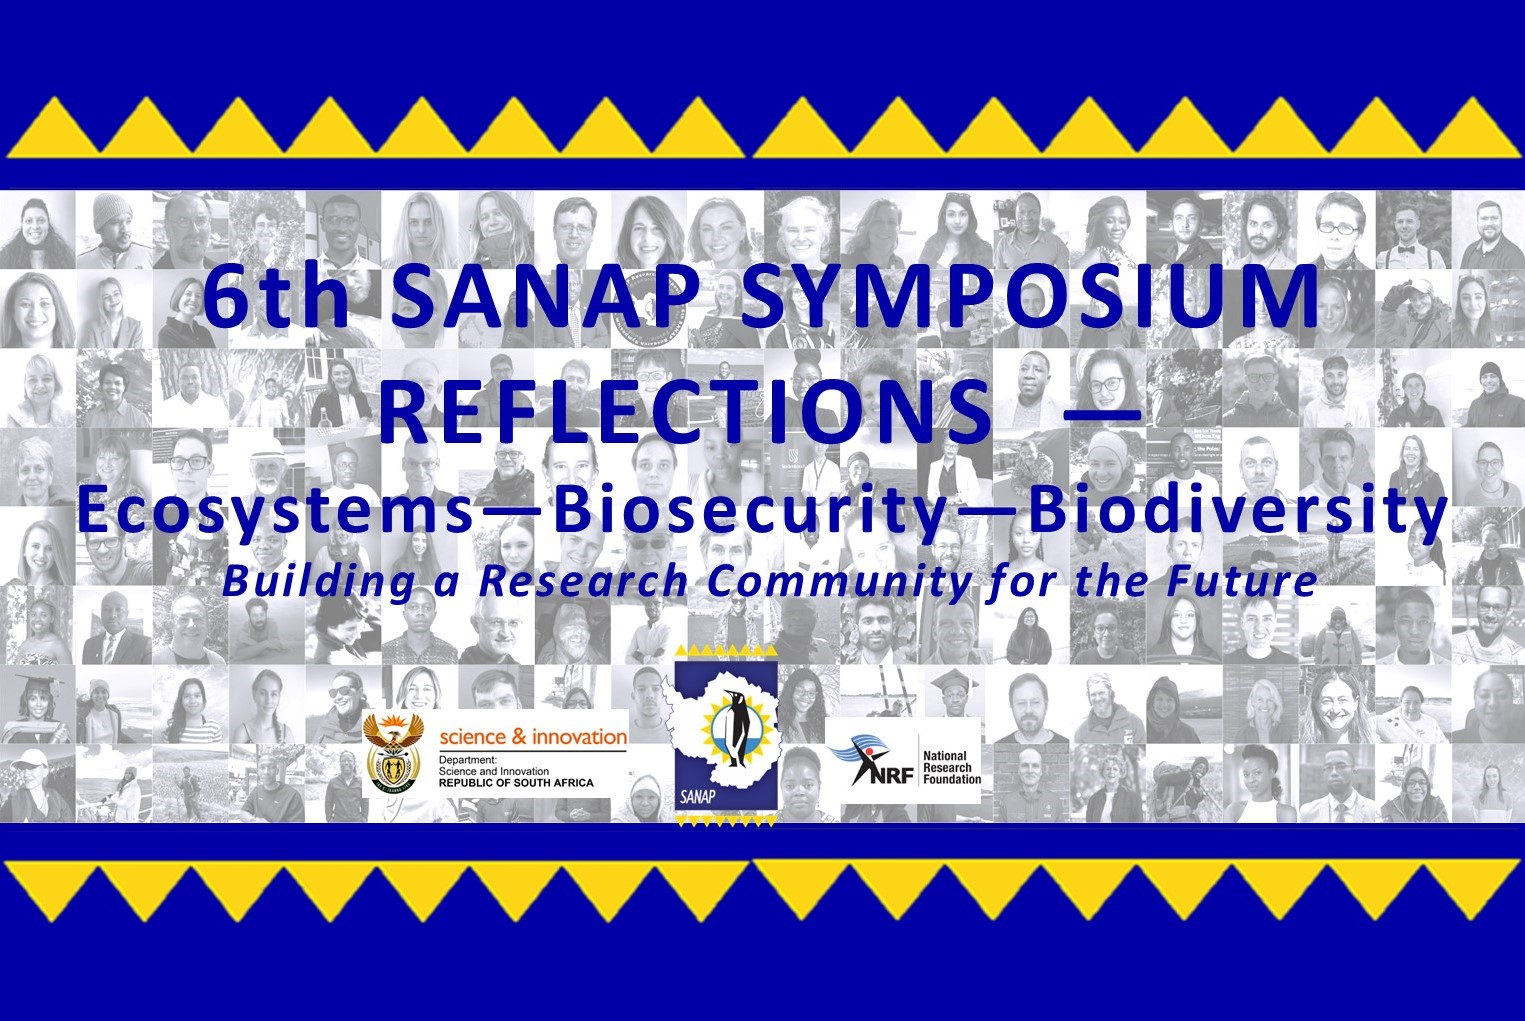 6th SANAP Symposium Reflections: Ecosystems, Biosecurity and Biodiversity (part 3)